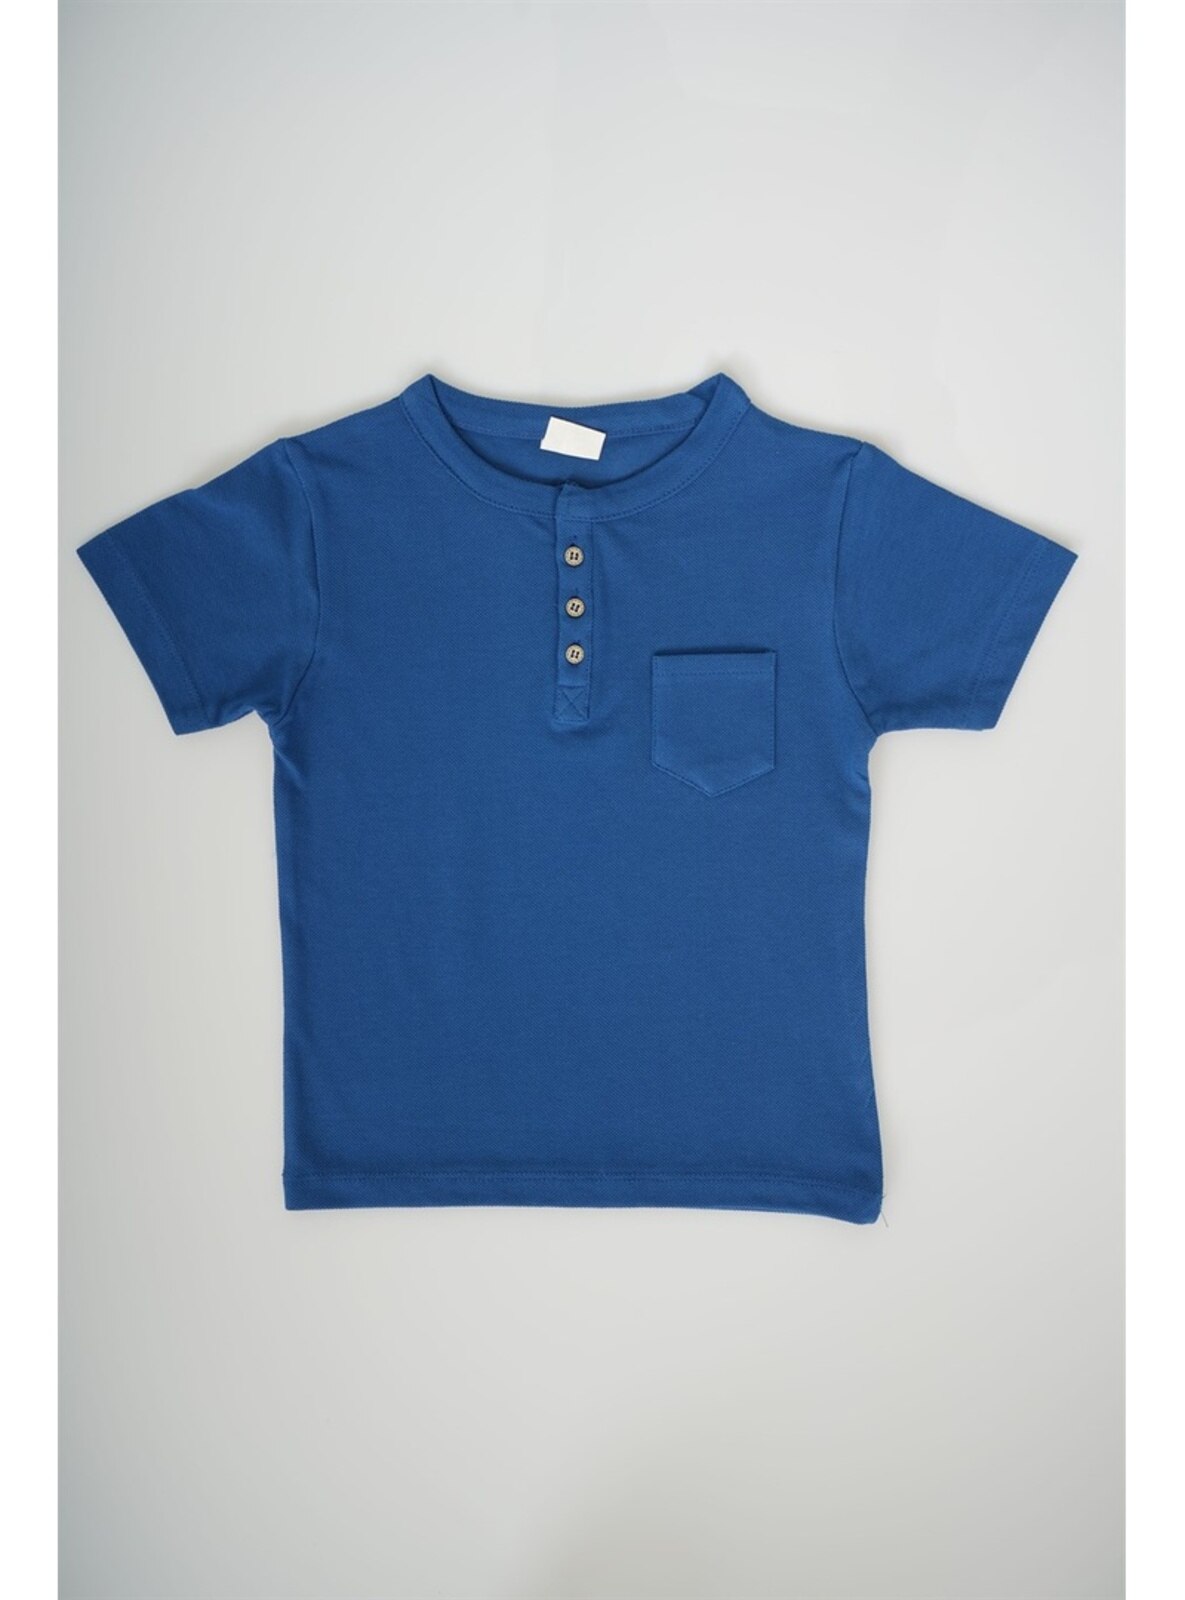 Saxe Blue - Baby T-Shirts